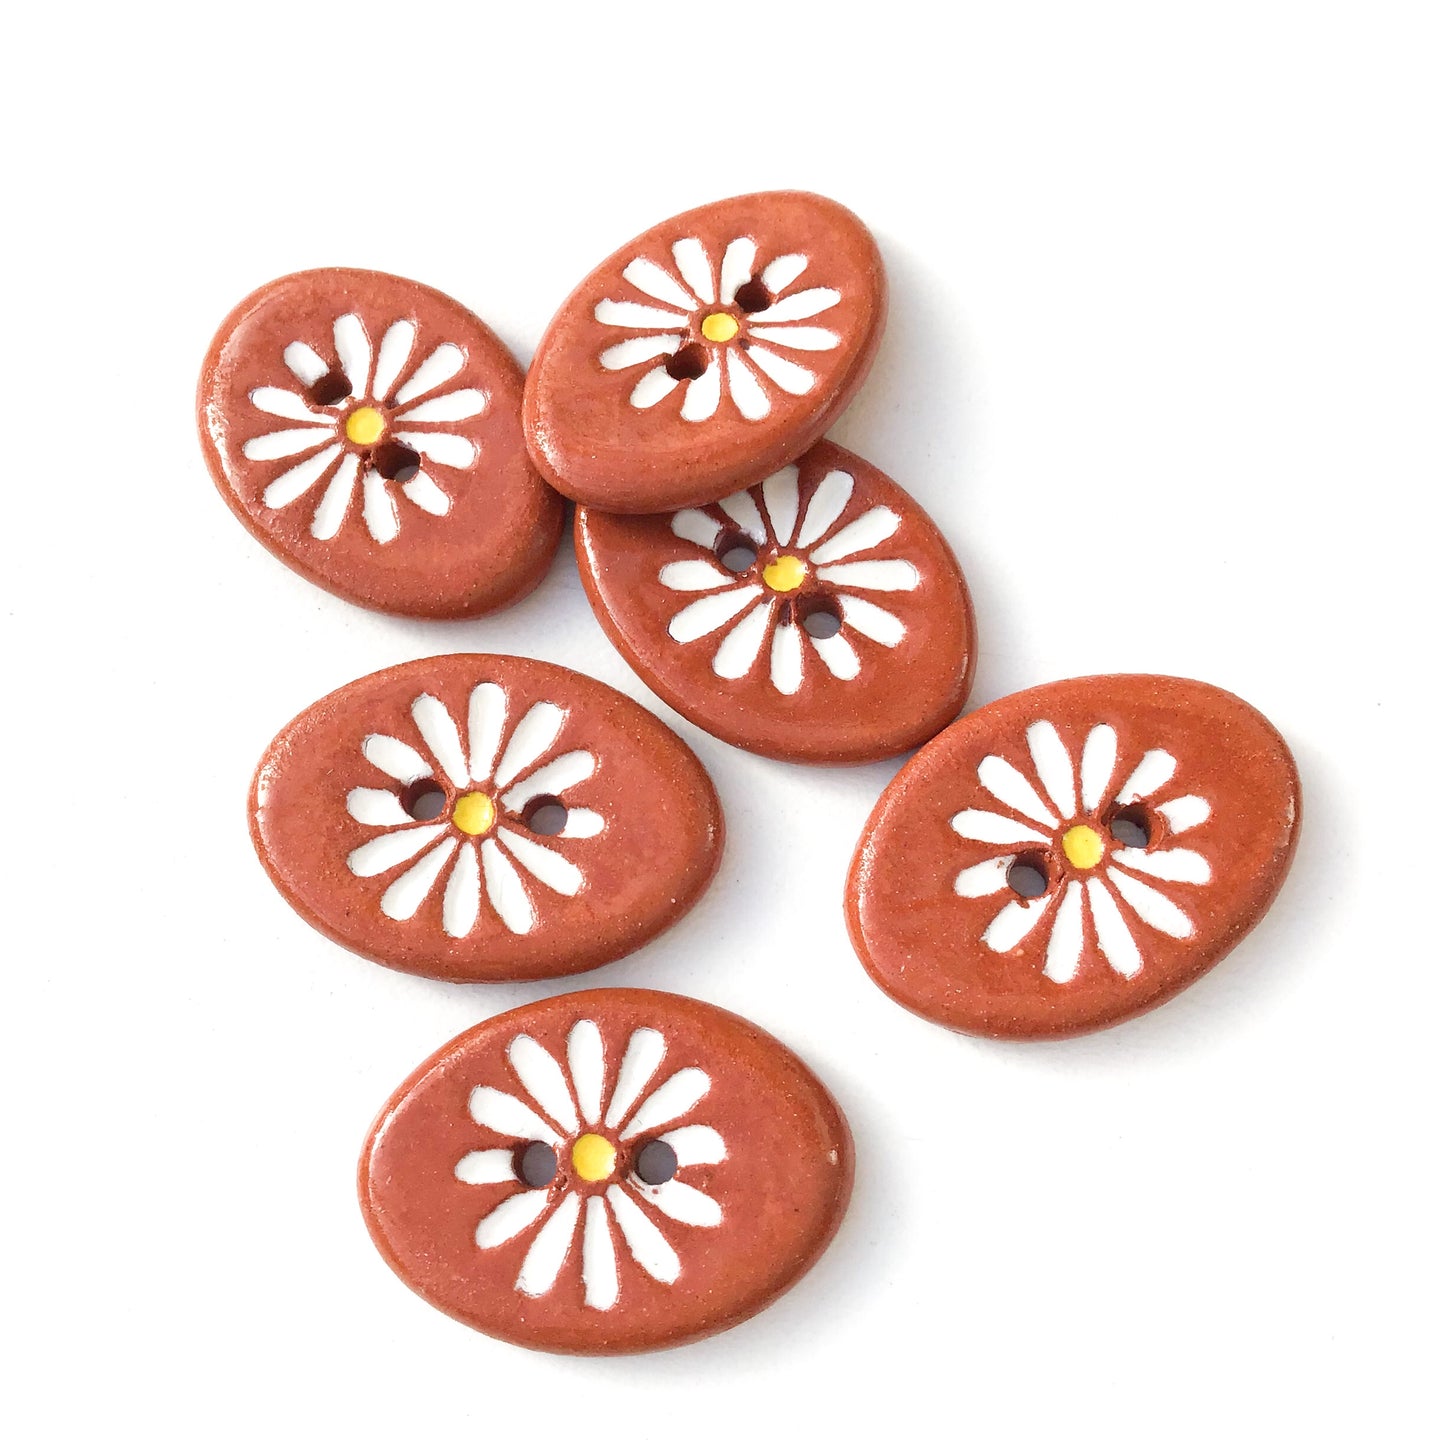 (Wholesale Accounts Only) 5/8" x 7/8" Daisy - oval -rounded edge - red clay (ws-293)